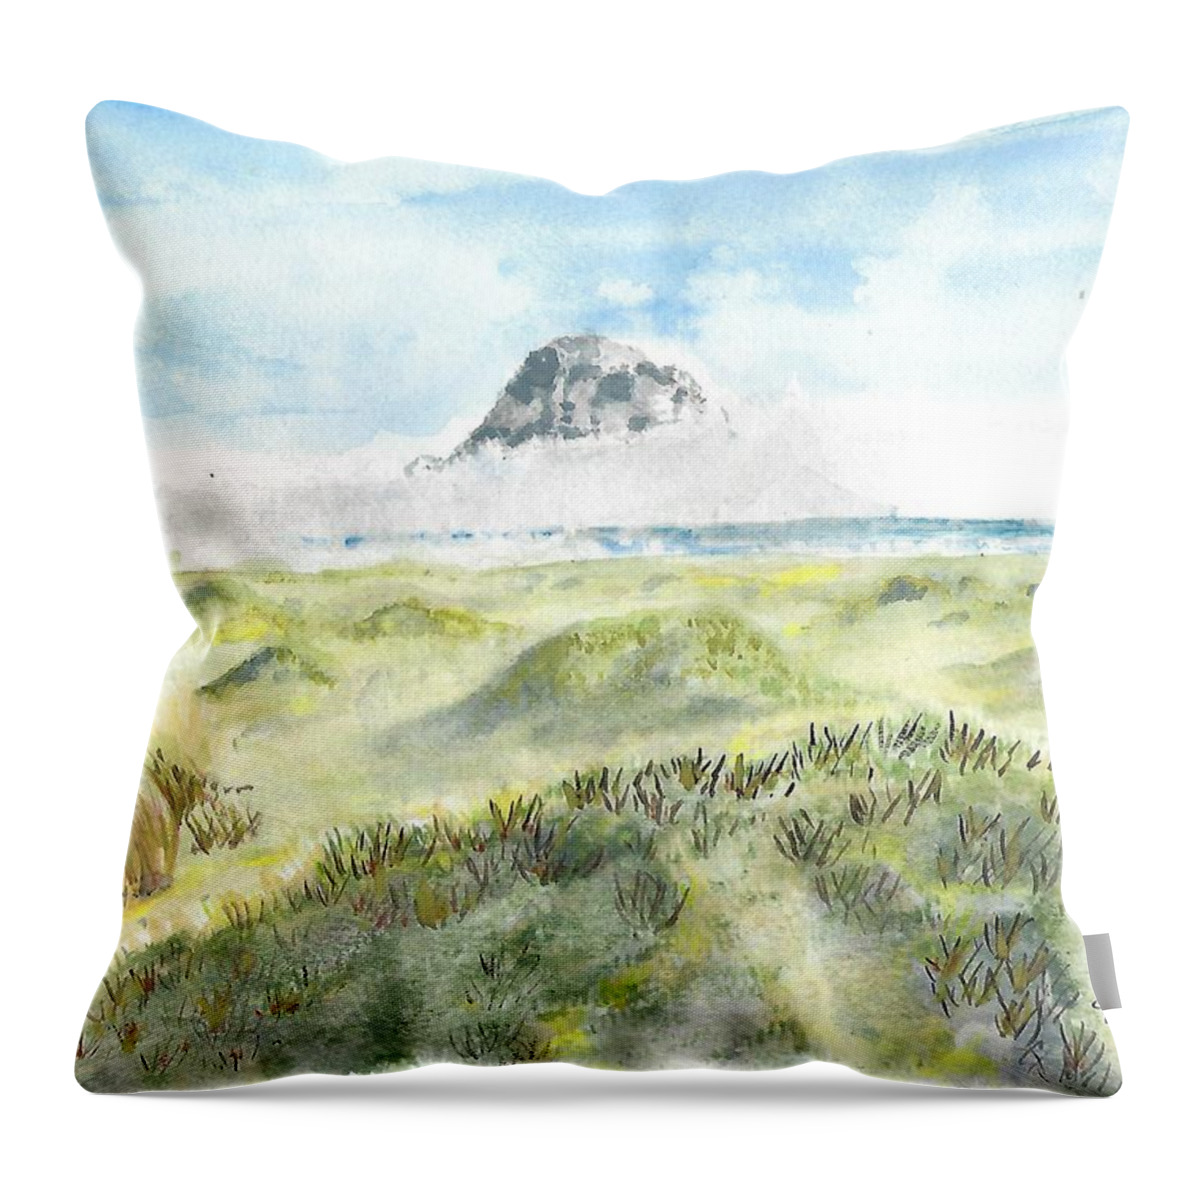 Oregon Throw Pillow featuring the painting Oregon Coast by Claudette Carlton